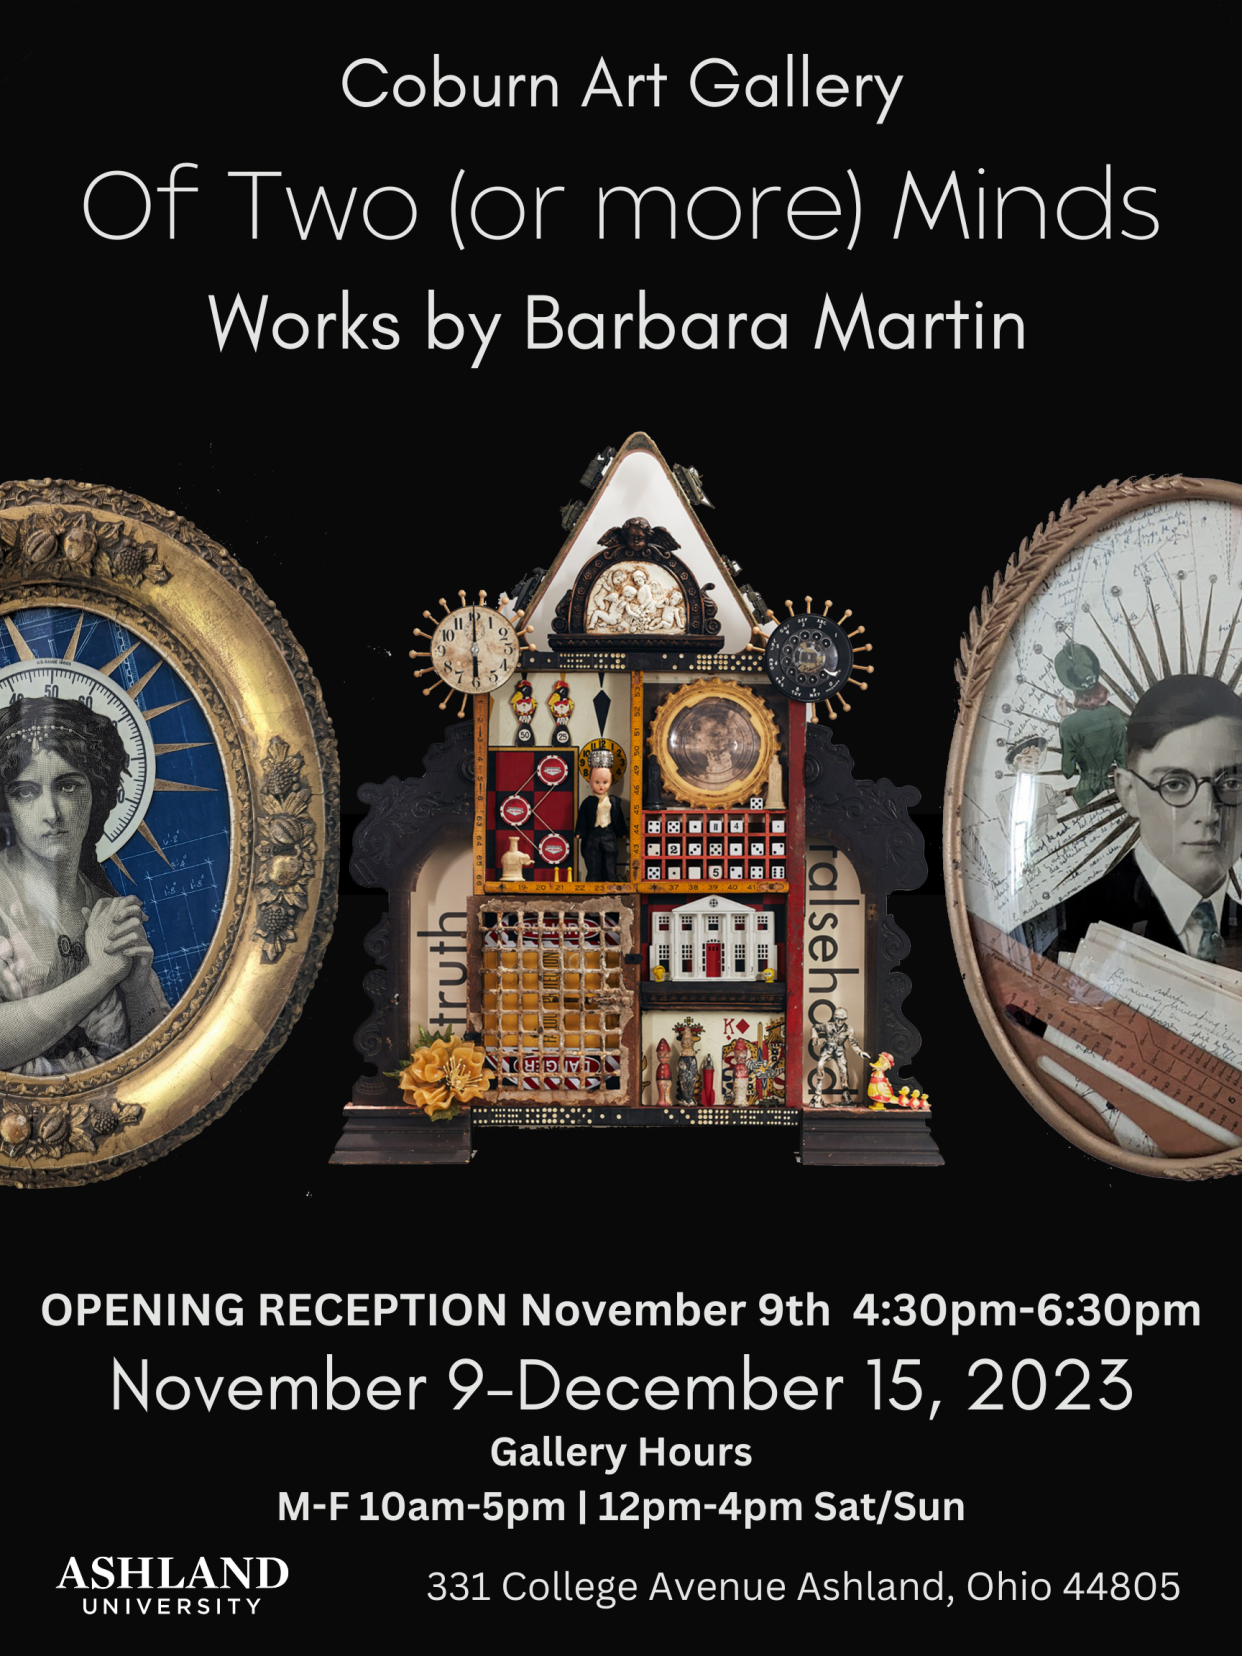 The Coburn Gallery and Ashland University Department of Art + Design will host “Of Two (or more) Minds,” a mixed media exhibition by Cleveland artist Barbara Martin, through Friday, Dec. 15.